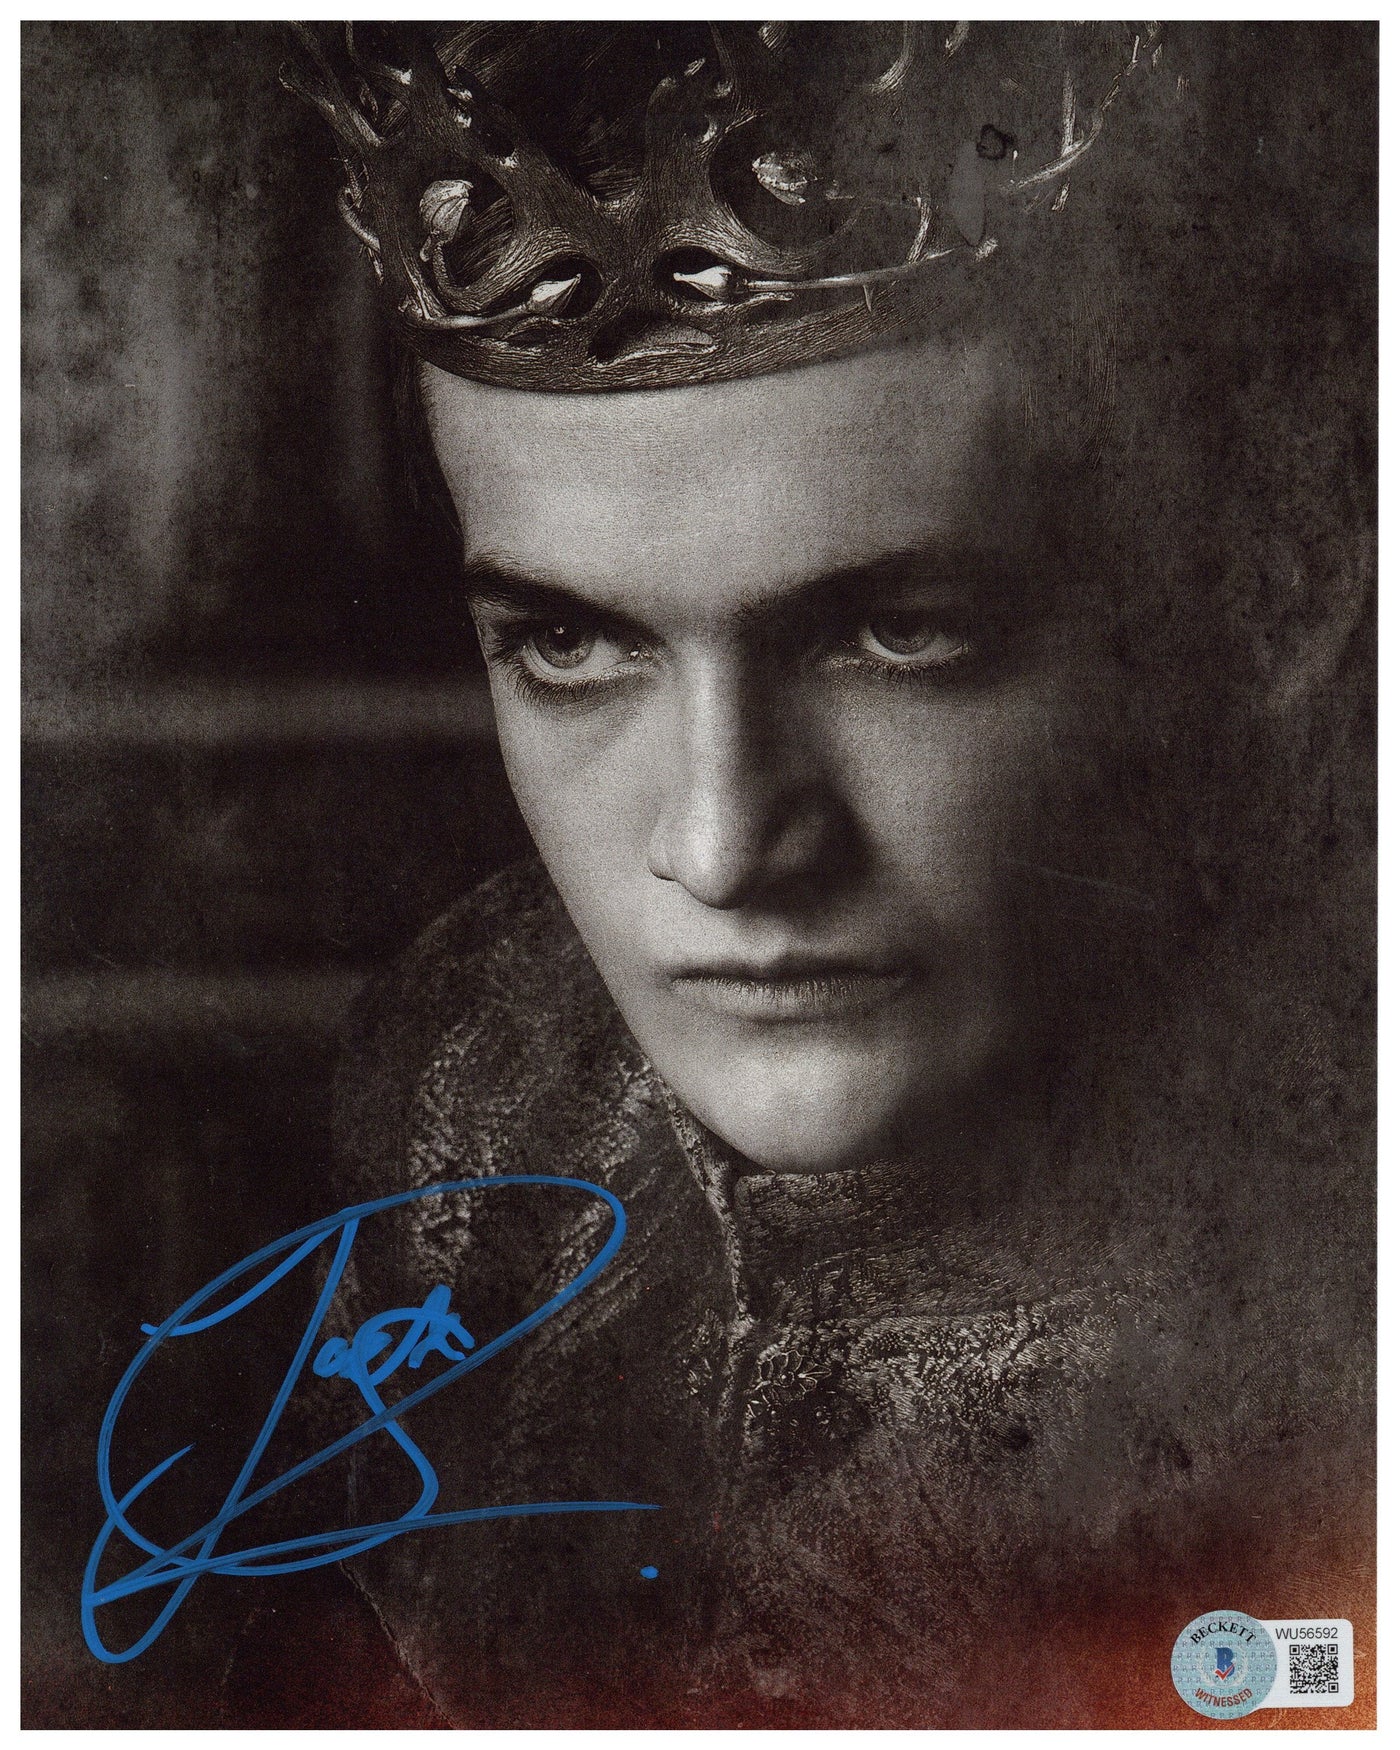 JACK GLEESON SIGNED 8X10 PHOTO GAME OF THRONES JOFFREY AUTOGRAPHED BAS 5